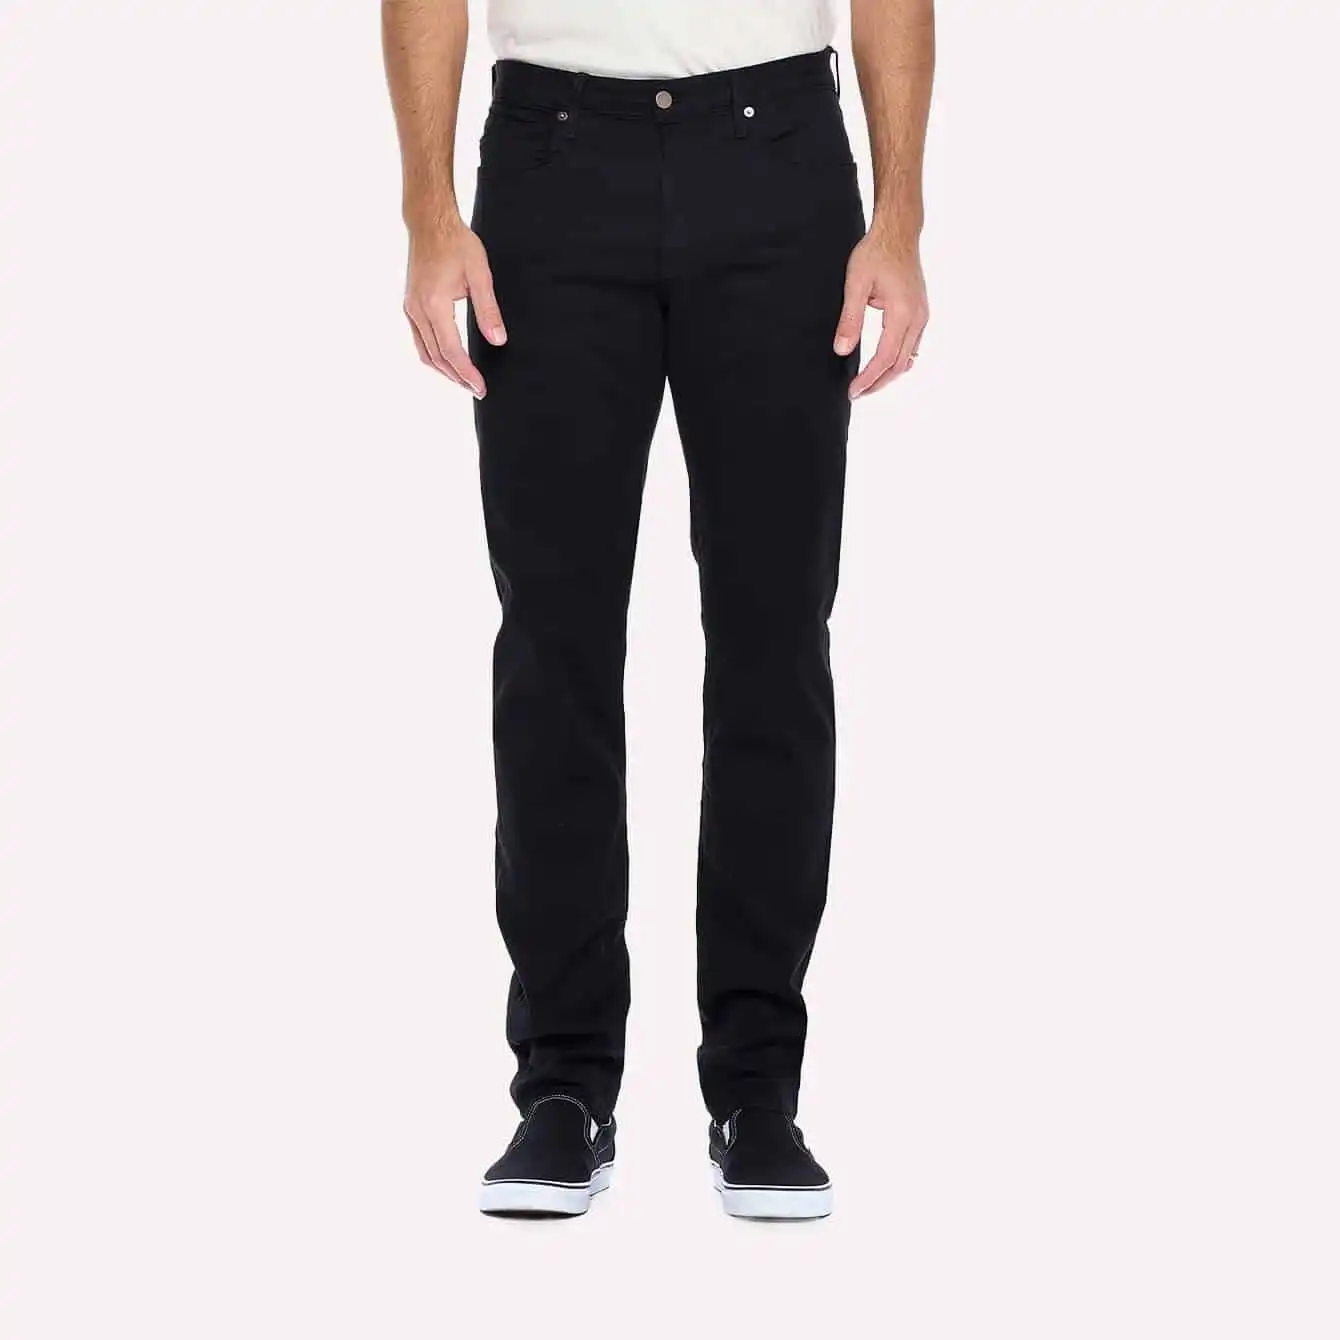 15 Best Men's Travel Pants for Your Most Common Travel Needs - The ...